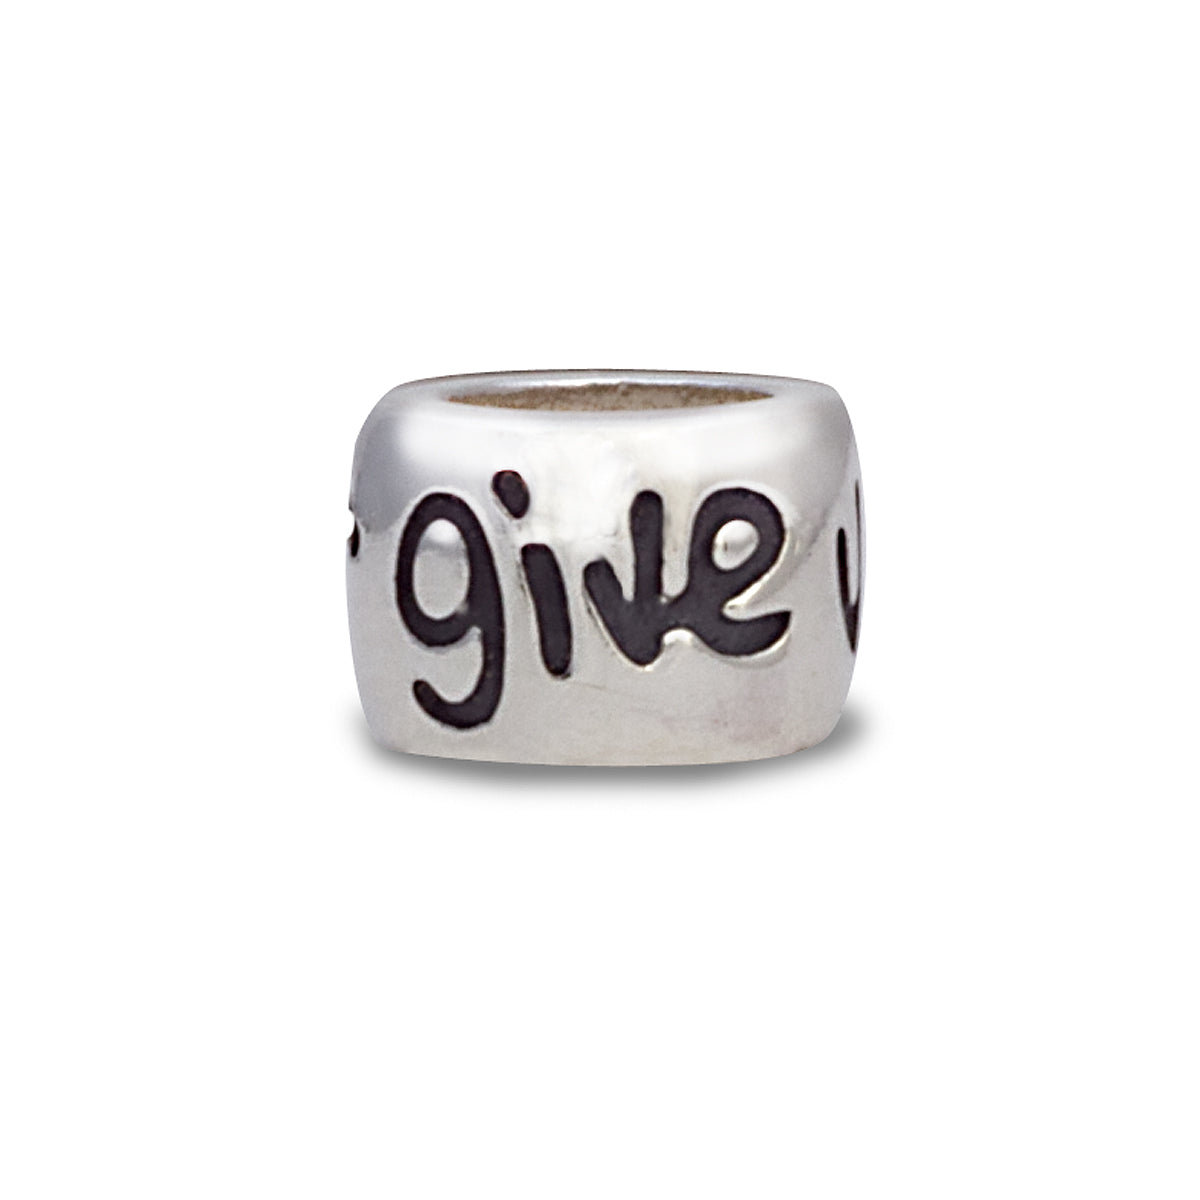 Never give up positive engraved silver charm gift for bracelets